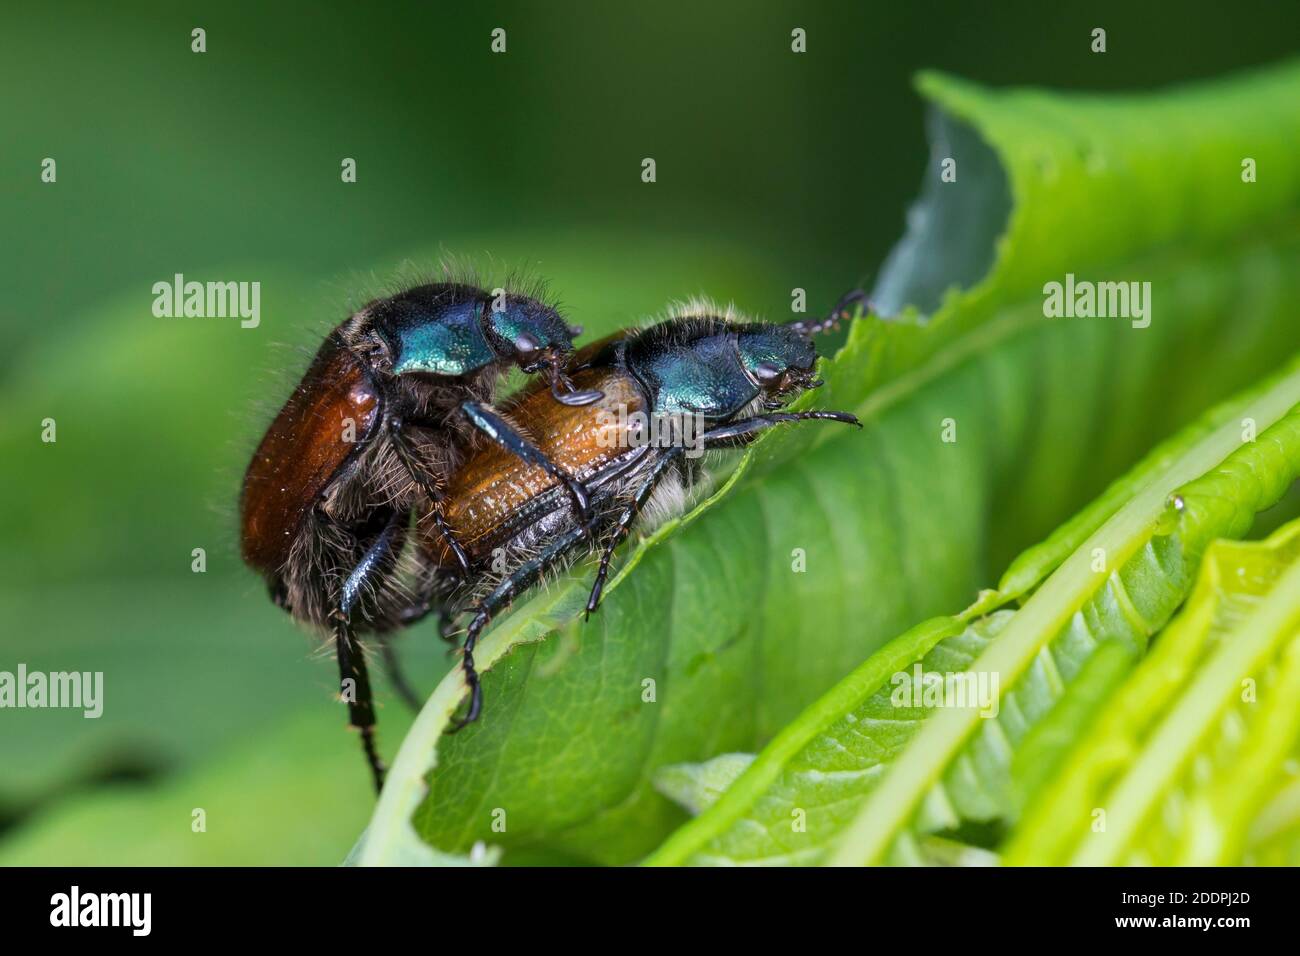 garden chafer, garden foliage beetle (Phyllopertha horticola, Phylloperta horticola), mating on a leaf, side view, Germany Stock Photo